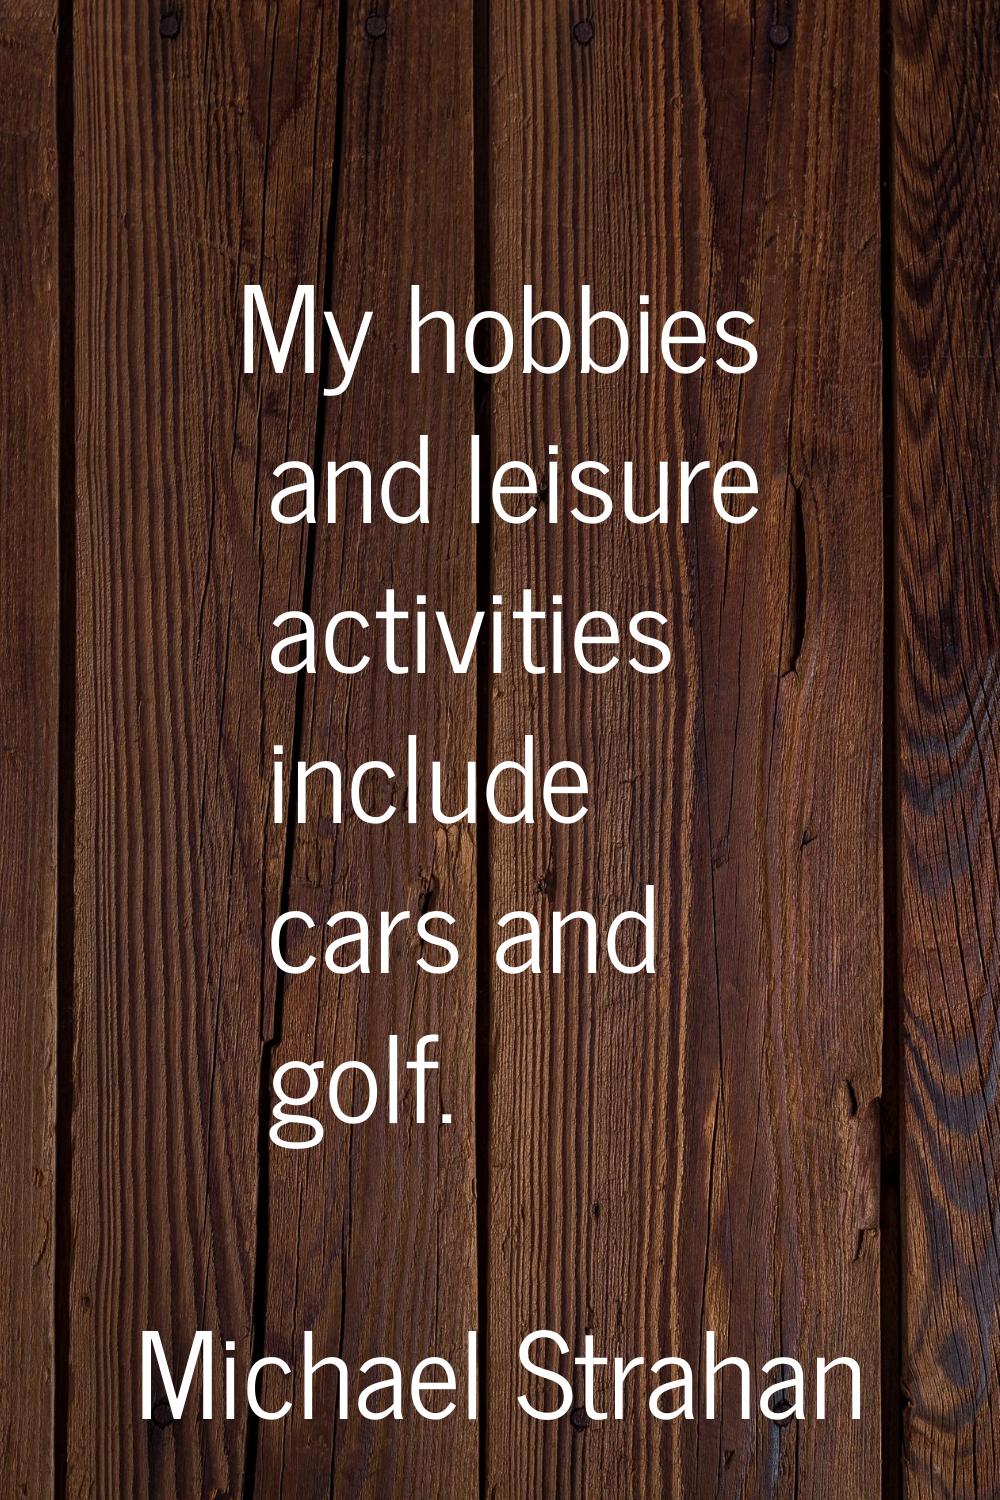 My hobbies and leisure activities include cars and golf.